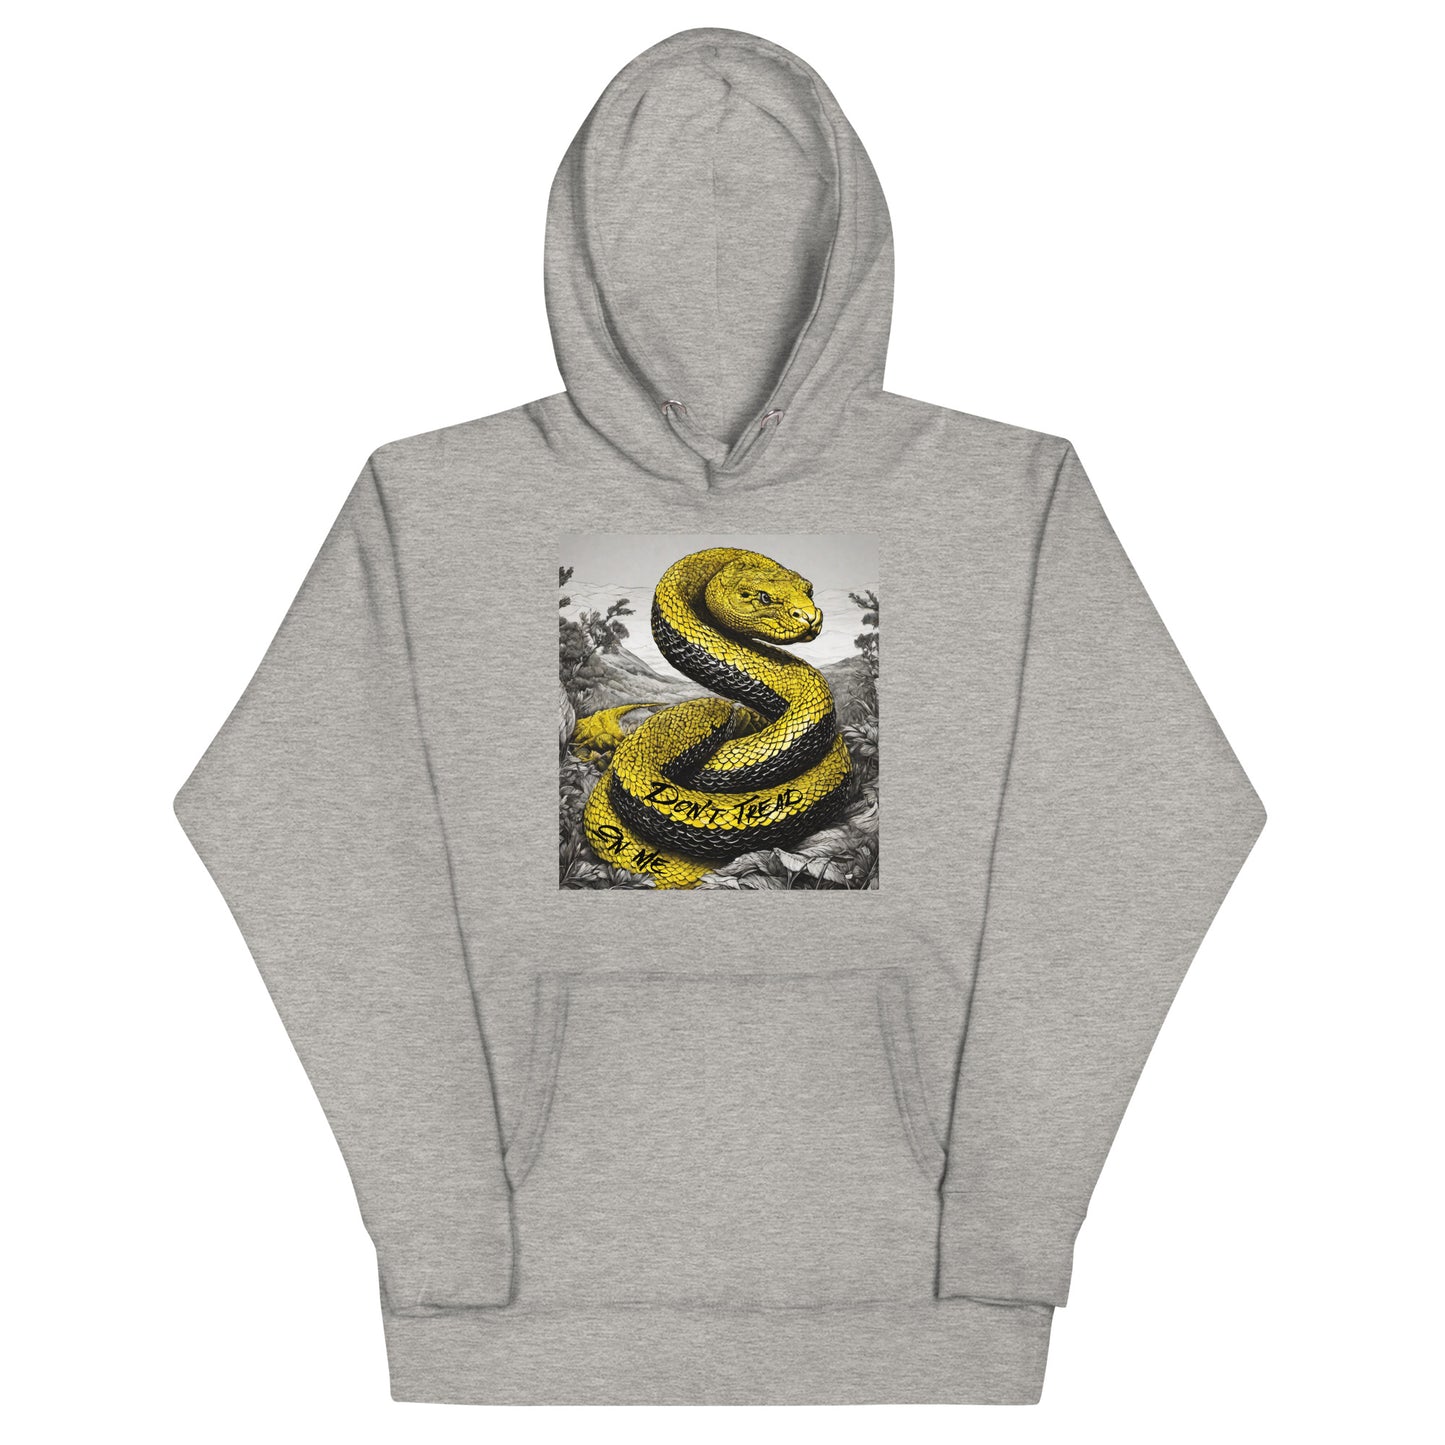 Don't Tread On Me Hoodie Carbon Grey